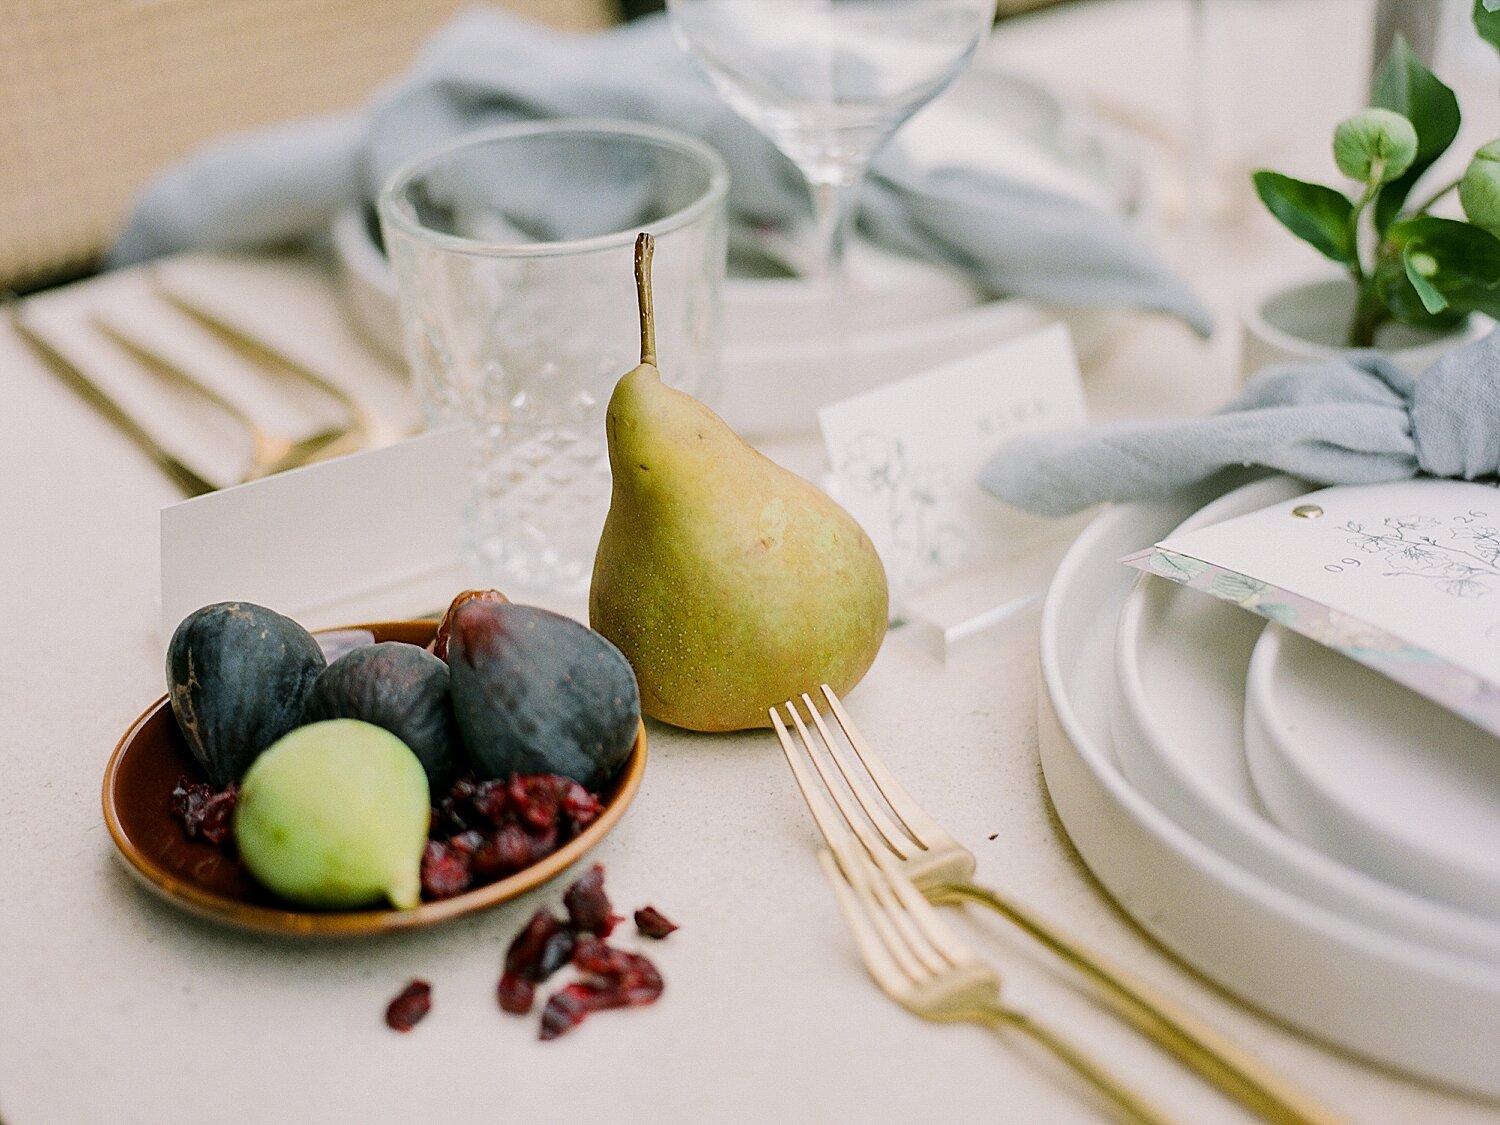 reception decor with pears and fruit | Asher Gardner Photography | Intimate Ceremony in DUMBO New York